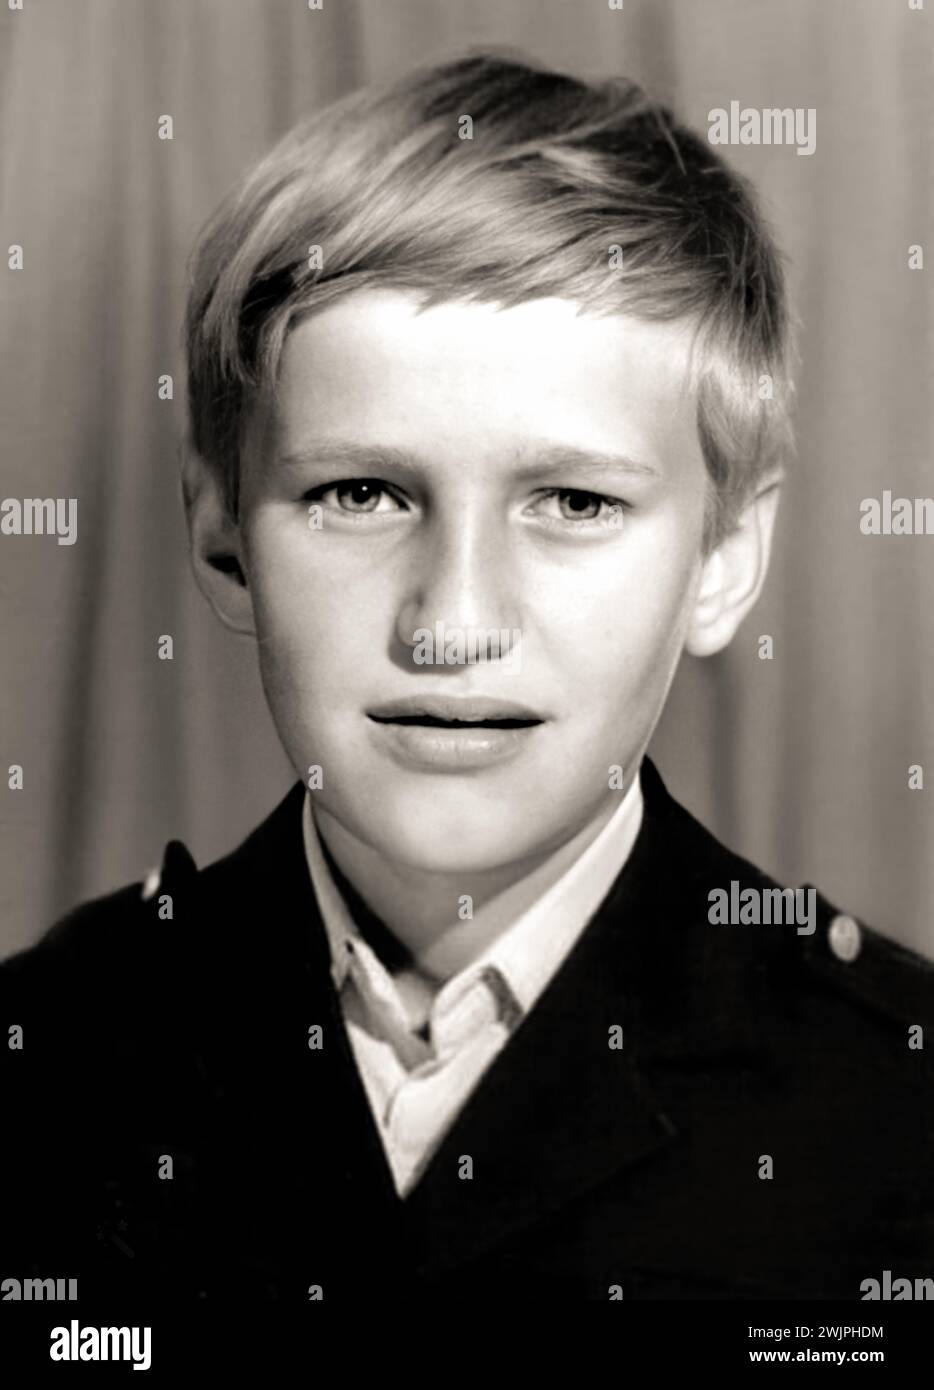 1986 c. , URSS  : The russian lawyer and politician ALEXEI NAVALNY ( Aleksej Naval'nyj , 1976 - 2024 ), great opposer leader of russian criminal dictator VLADIMIR PUTIN ( born in 1952 ), when was young boy , aged 10 at school . He was recognised by Amnesty International as a prisoner of conscience and was awarded the Sakharov Prize for his work on human rights in 2021 .  Unknown photographer . - OPPOSITORE POLITICO - RUSSIA - POLITICO -  POLITICA - POLITIC - personalità personalità da giovane giovani - personality personalities when was young - bambino - bambini - CHILD - CHILDREN - CHILDHOOD Stock Photo